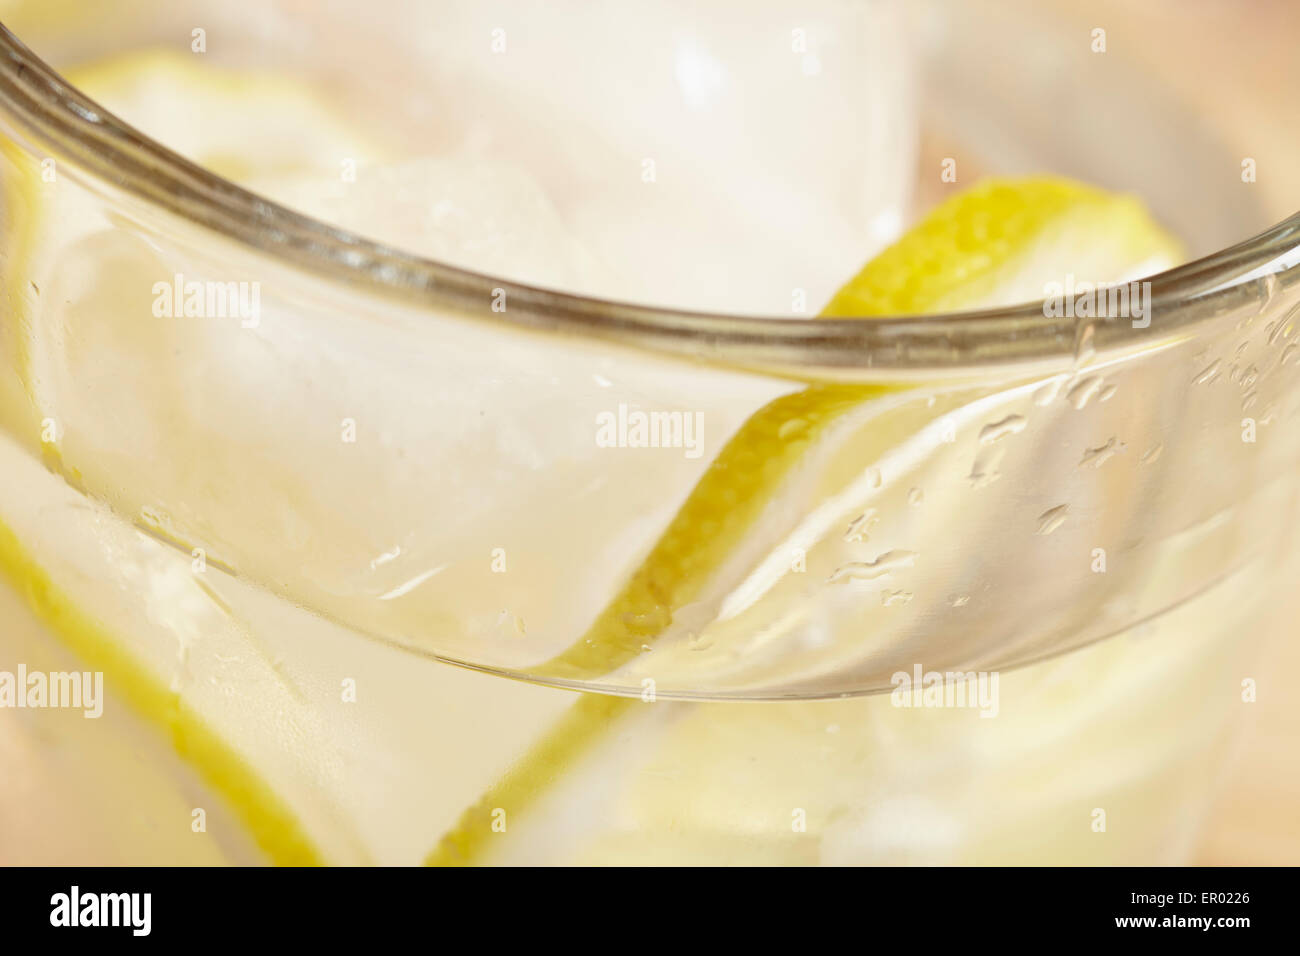 a glass of lemon water with ice Stock Photo